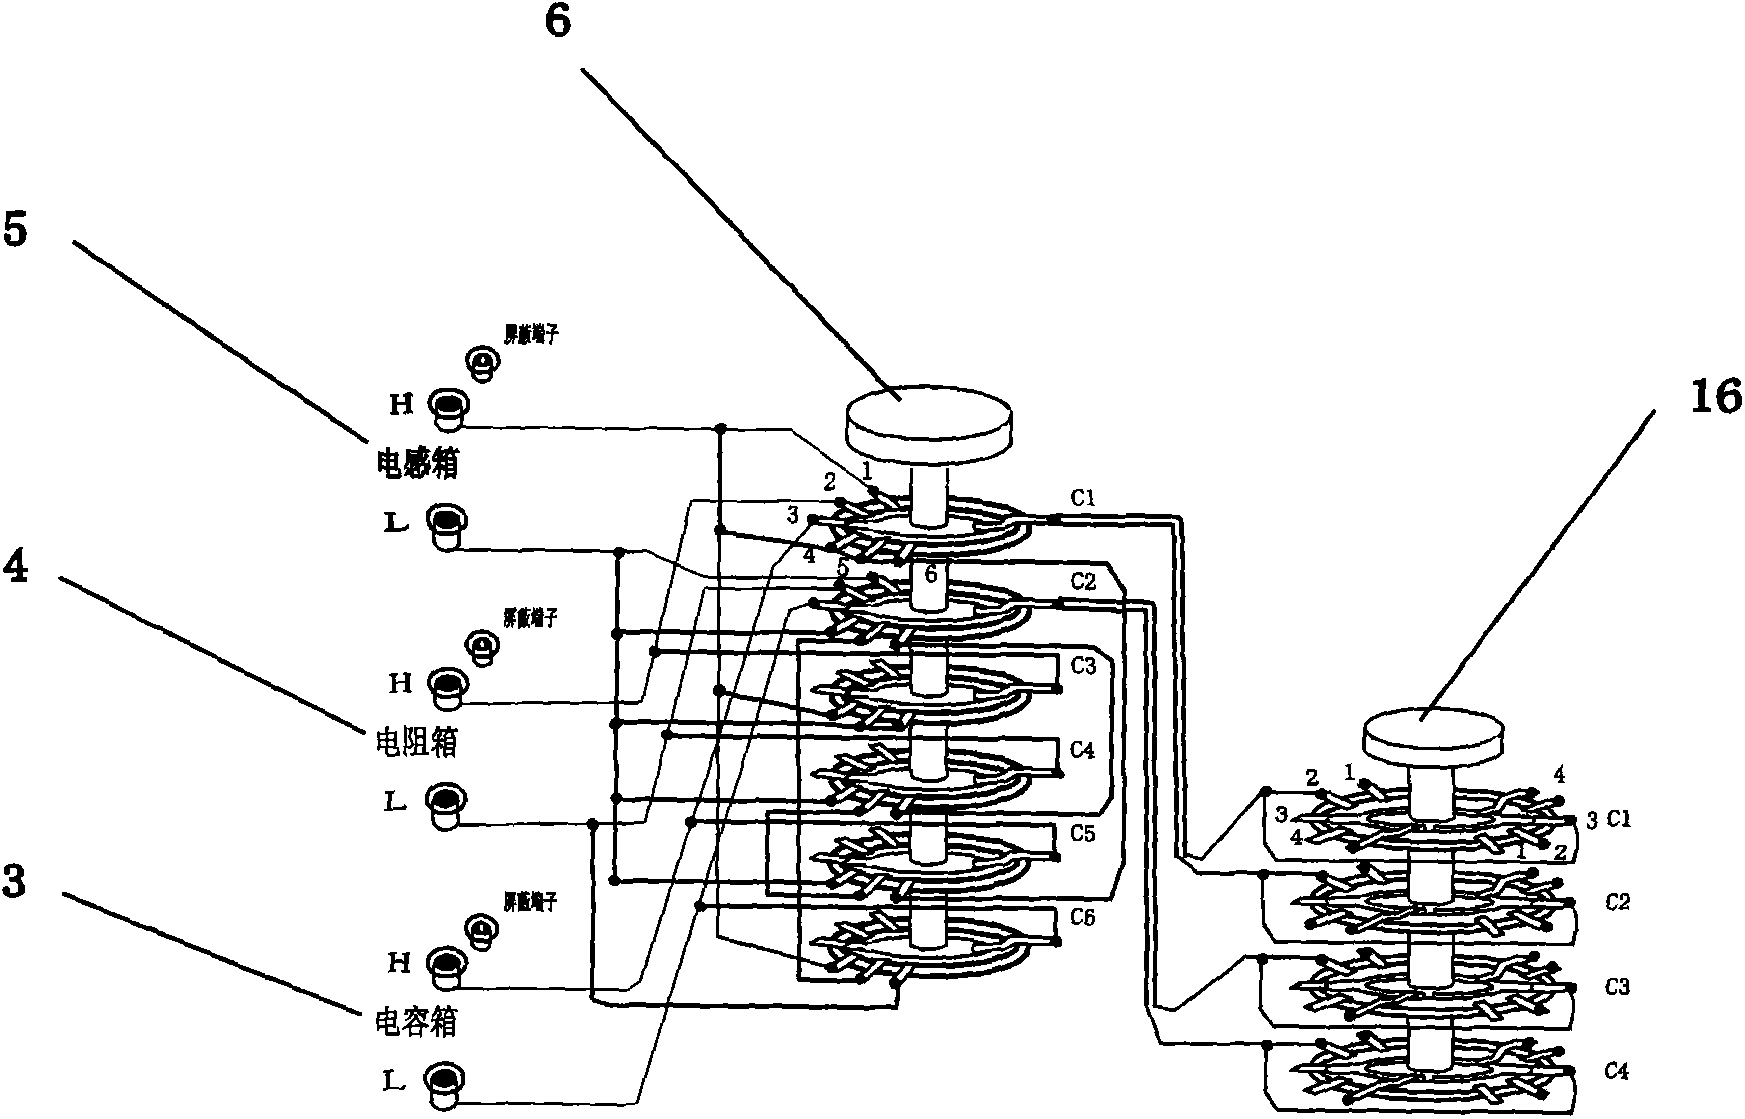 Inductance, capacitance and resistance standard device